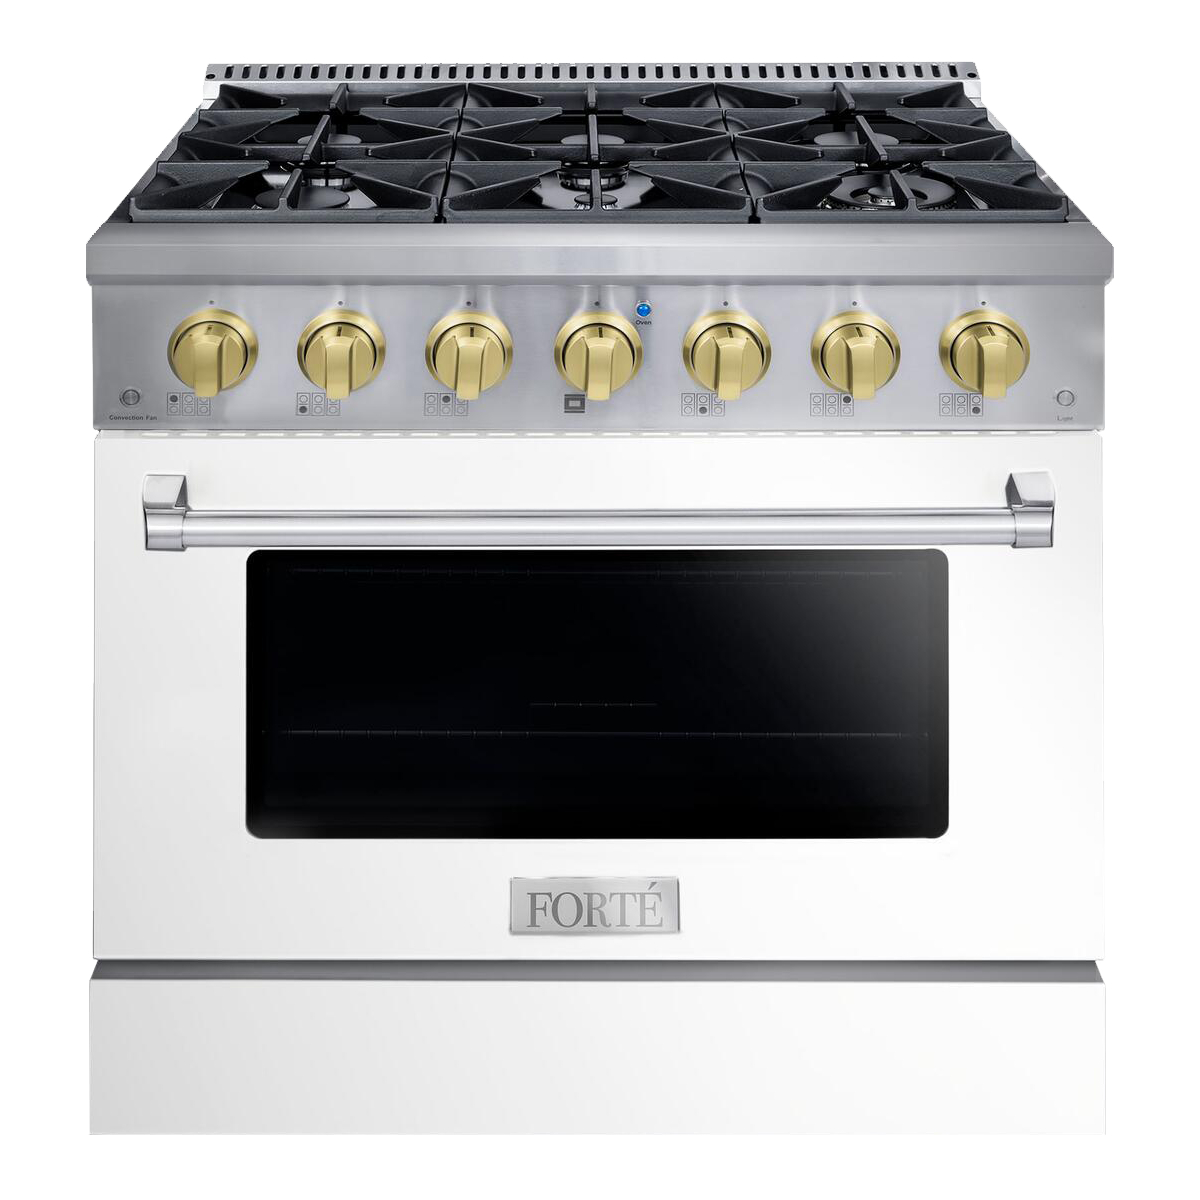 The Luxury 36” FORTÉ Freestanding Gas Range in White is Here